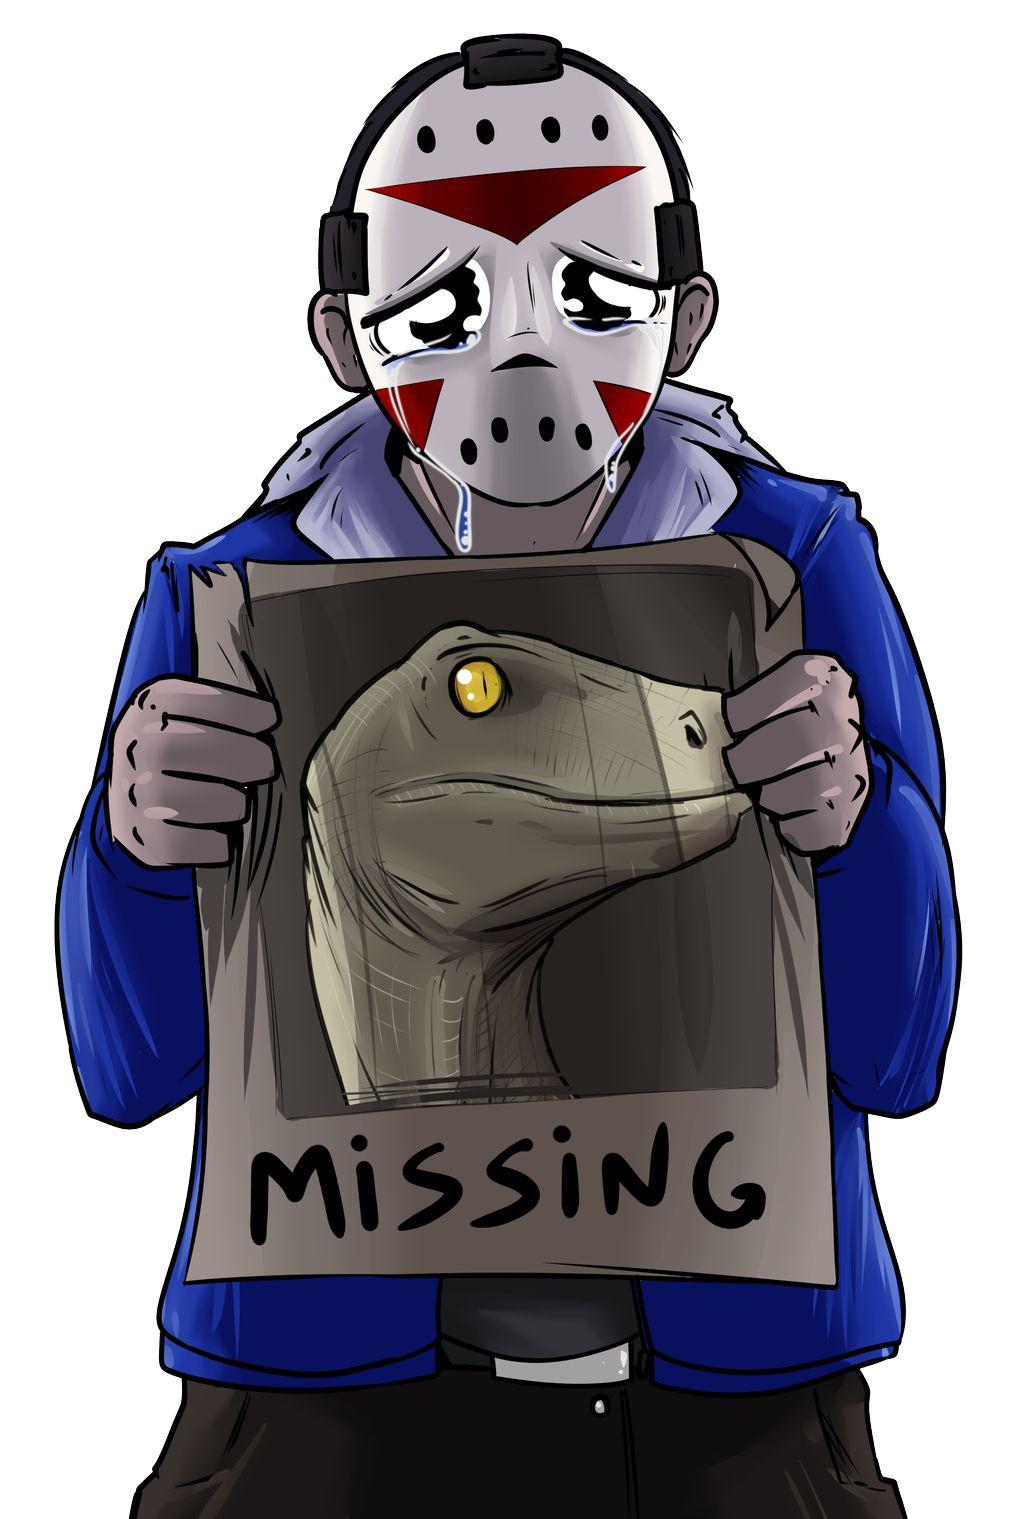 H2ODelirious with a missing poster of Clawz Clawz. Youtubers